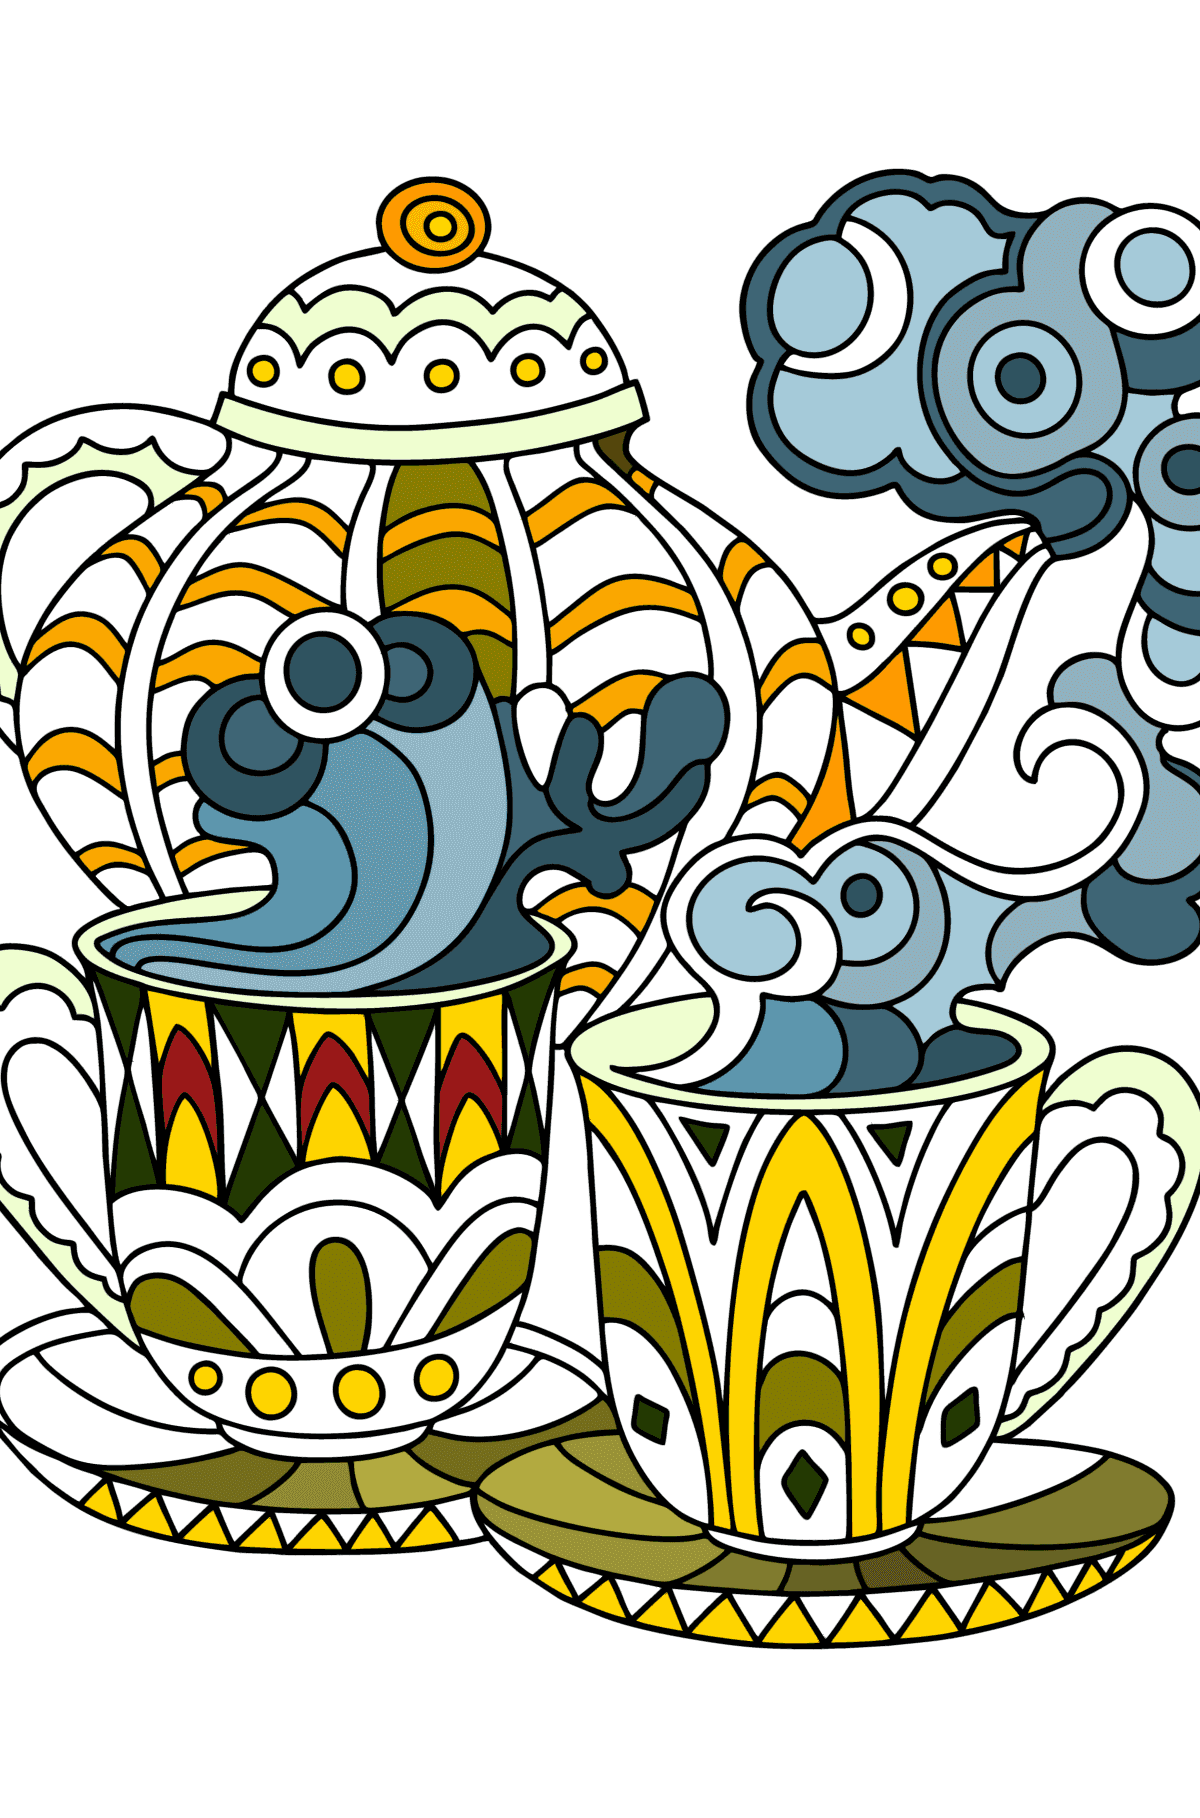 Doodle Coloring Page for Kids - Tea Party - Coloring Pages for Kids